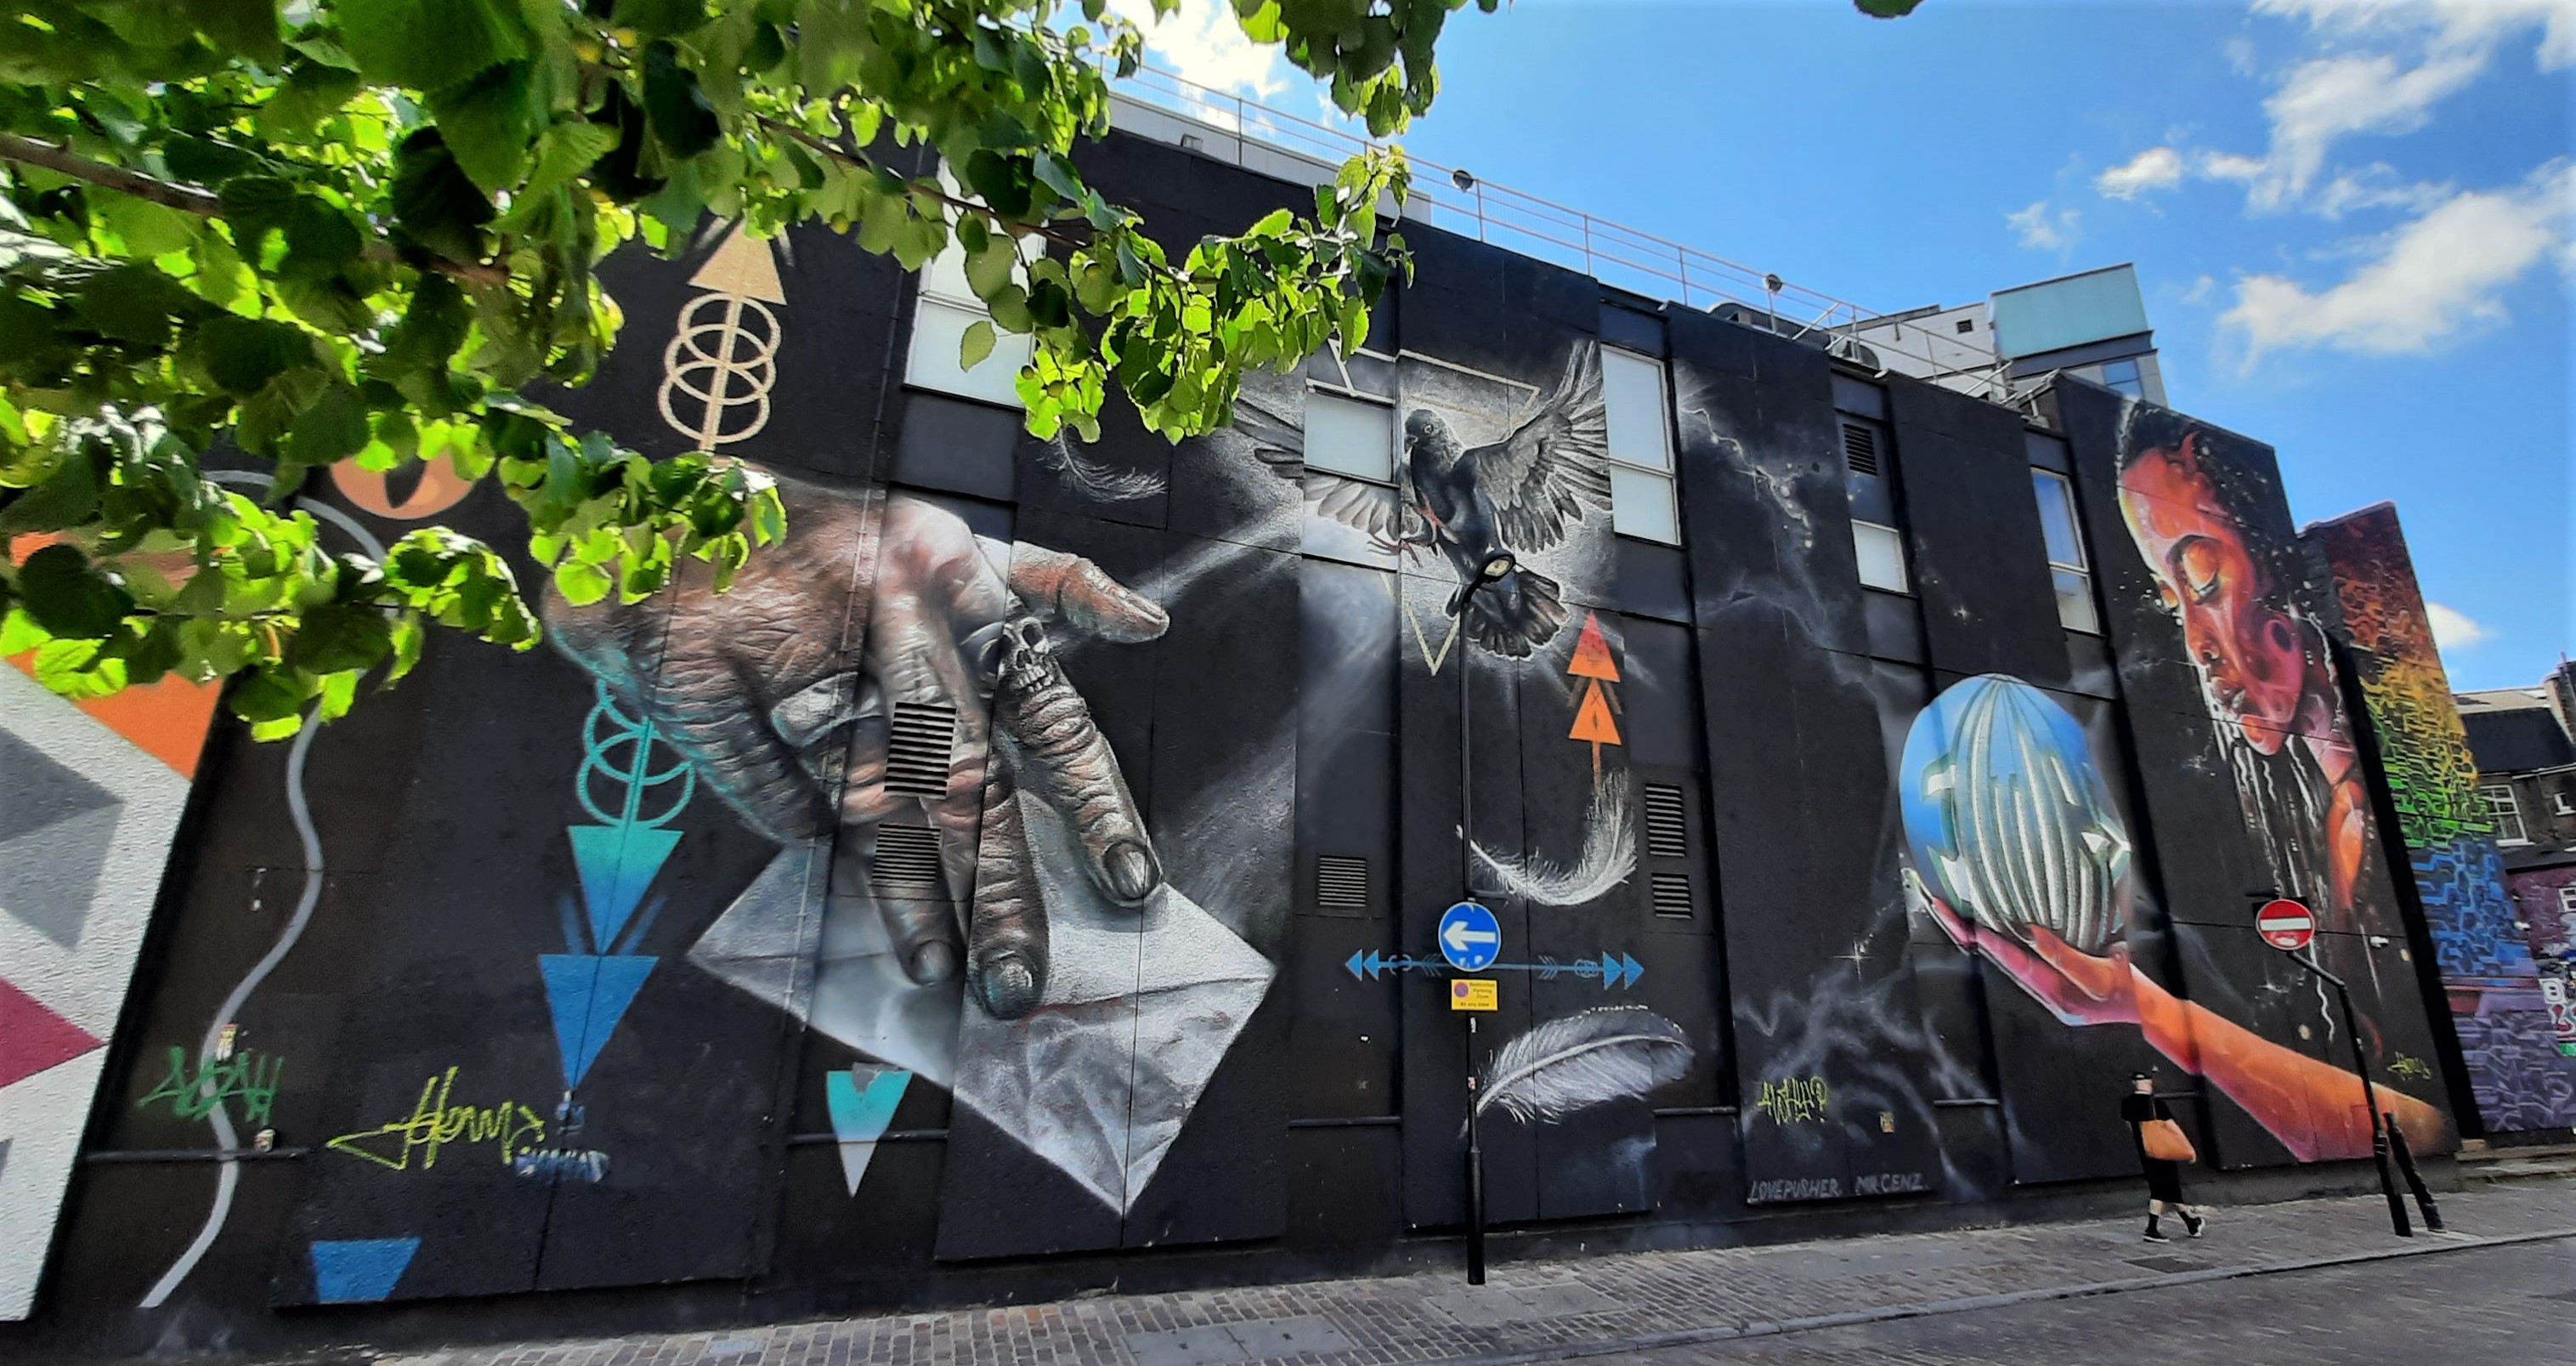 Graffiti 6550  by the artist Mr CENZ captured by Mephisroth in London United Kingdom